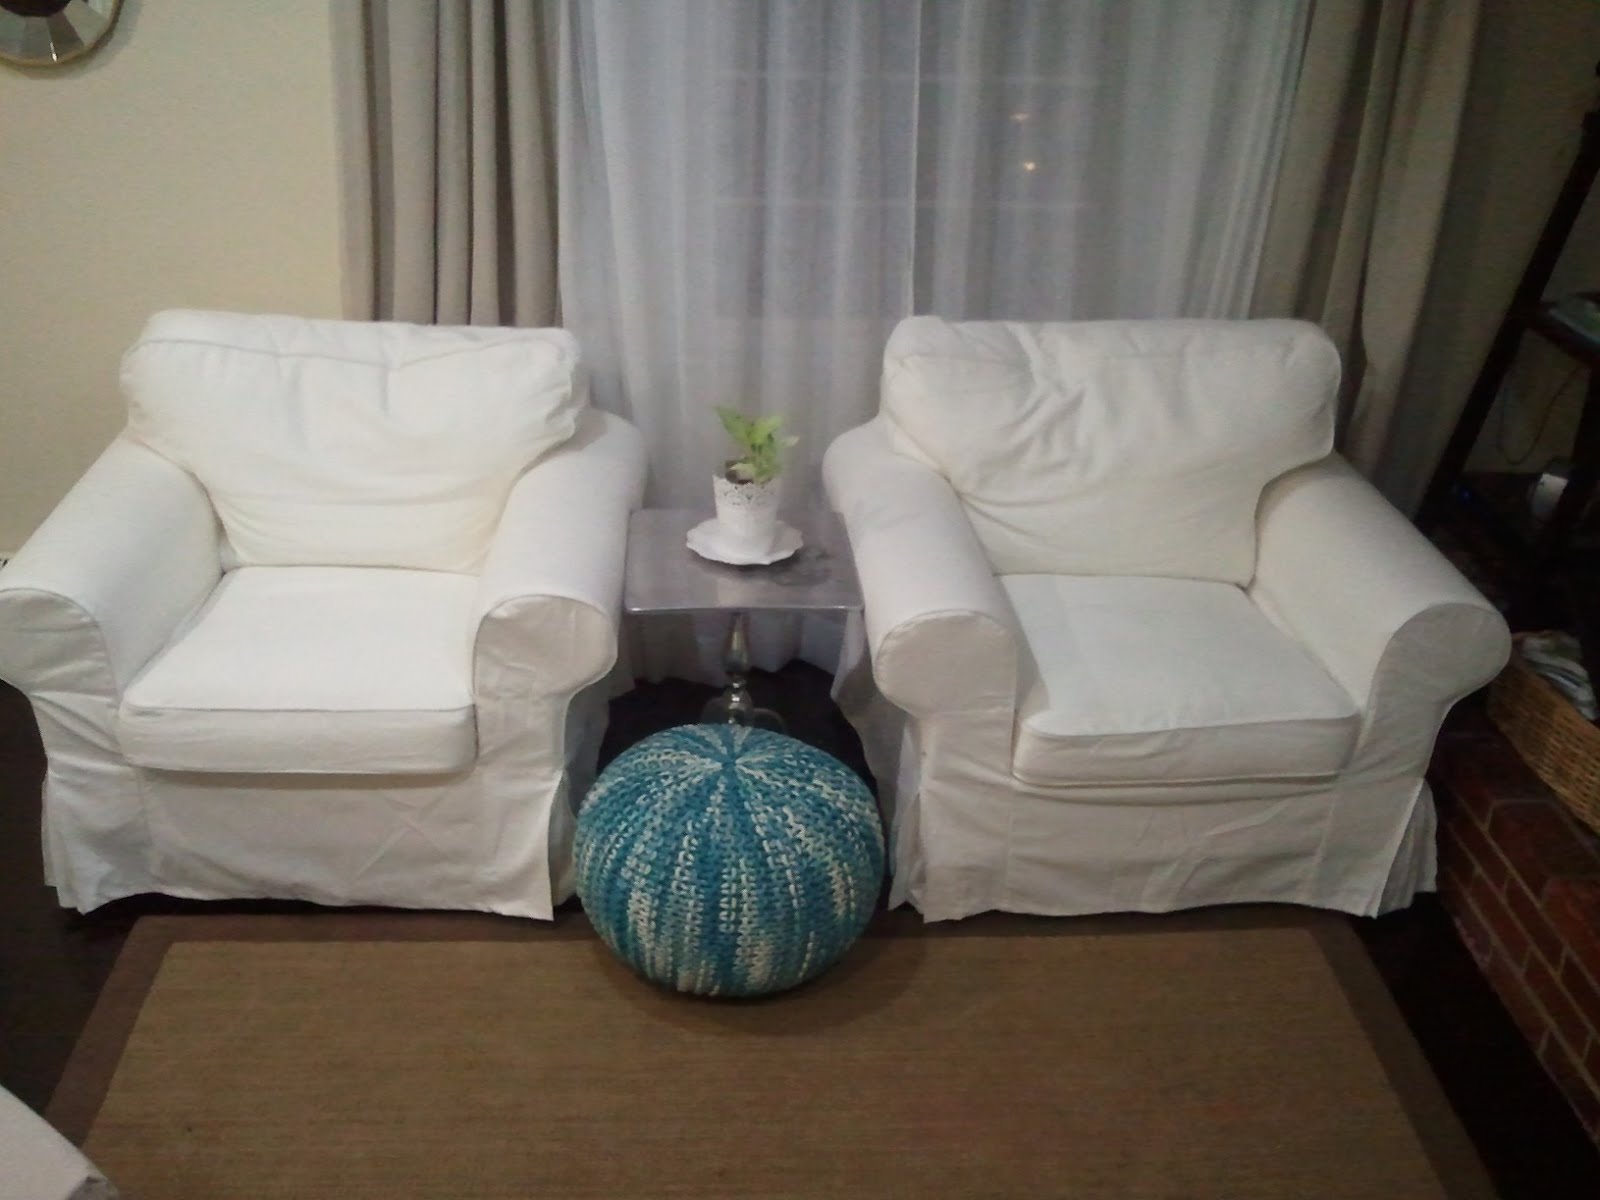 I Dream of Decor: New Living Room Chairs from Ikea!